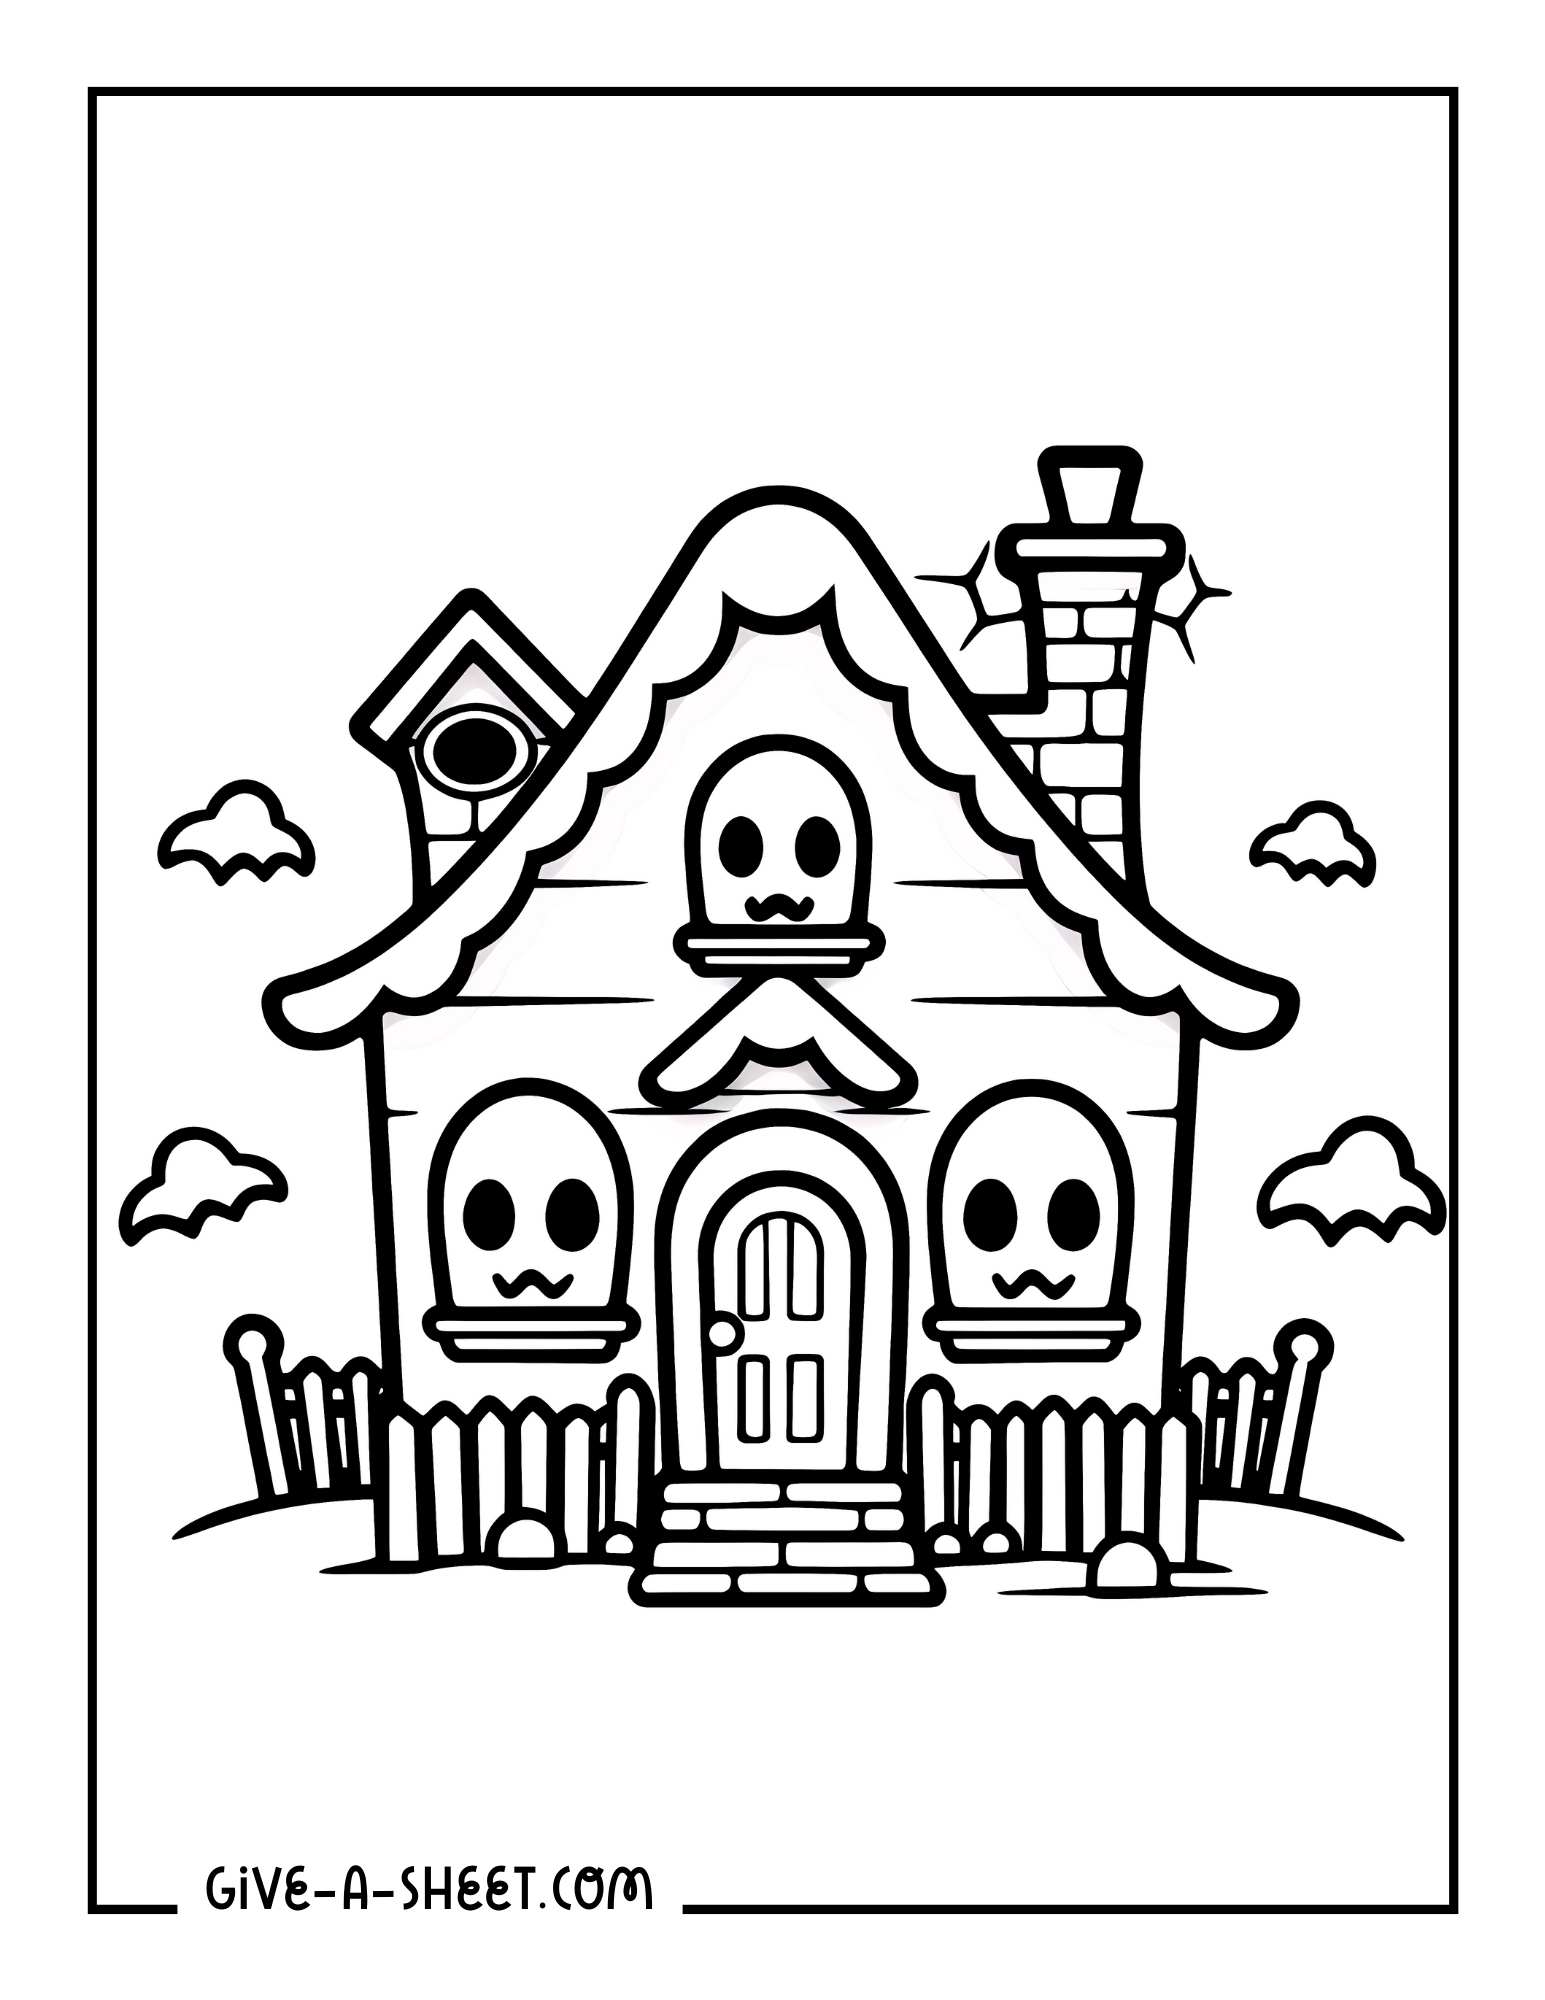 Haunted house with ghosts coloring page for kids.